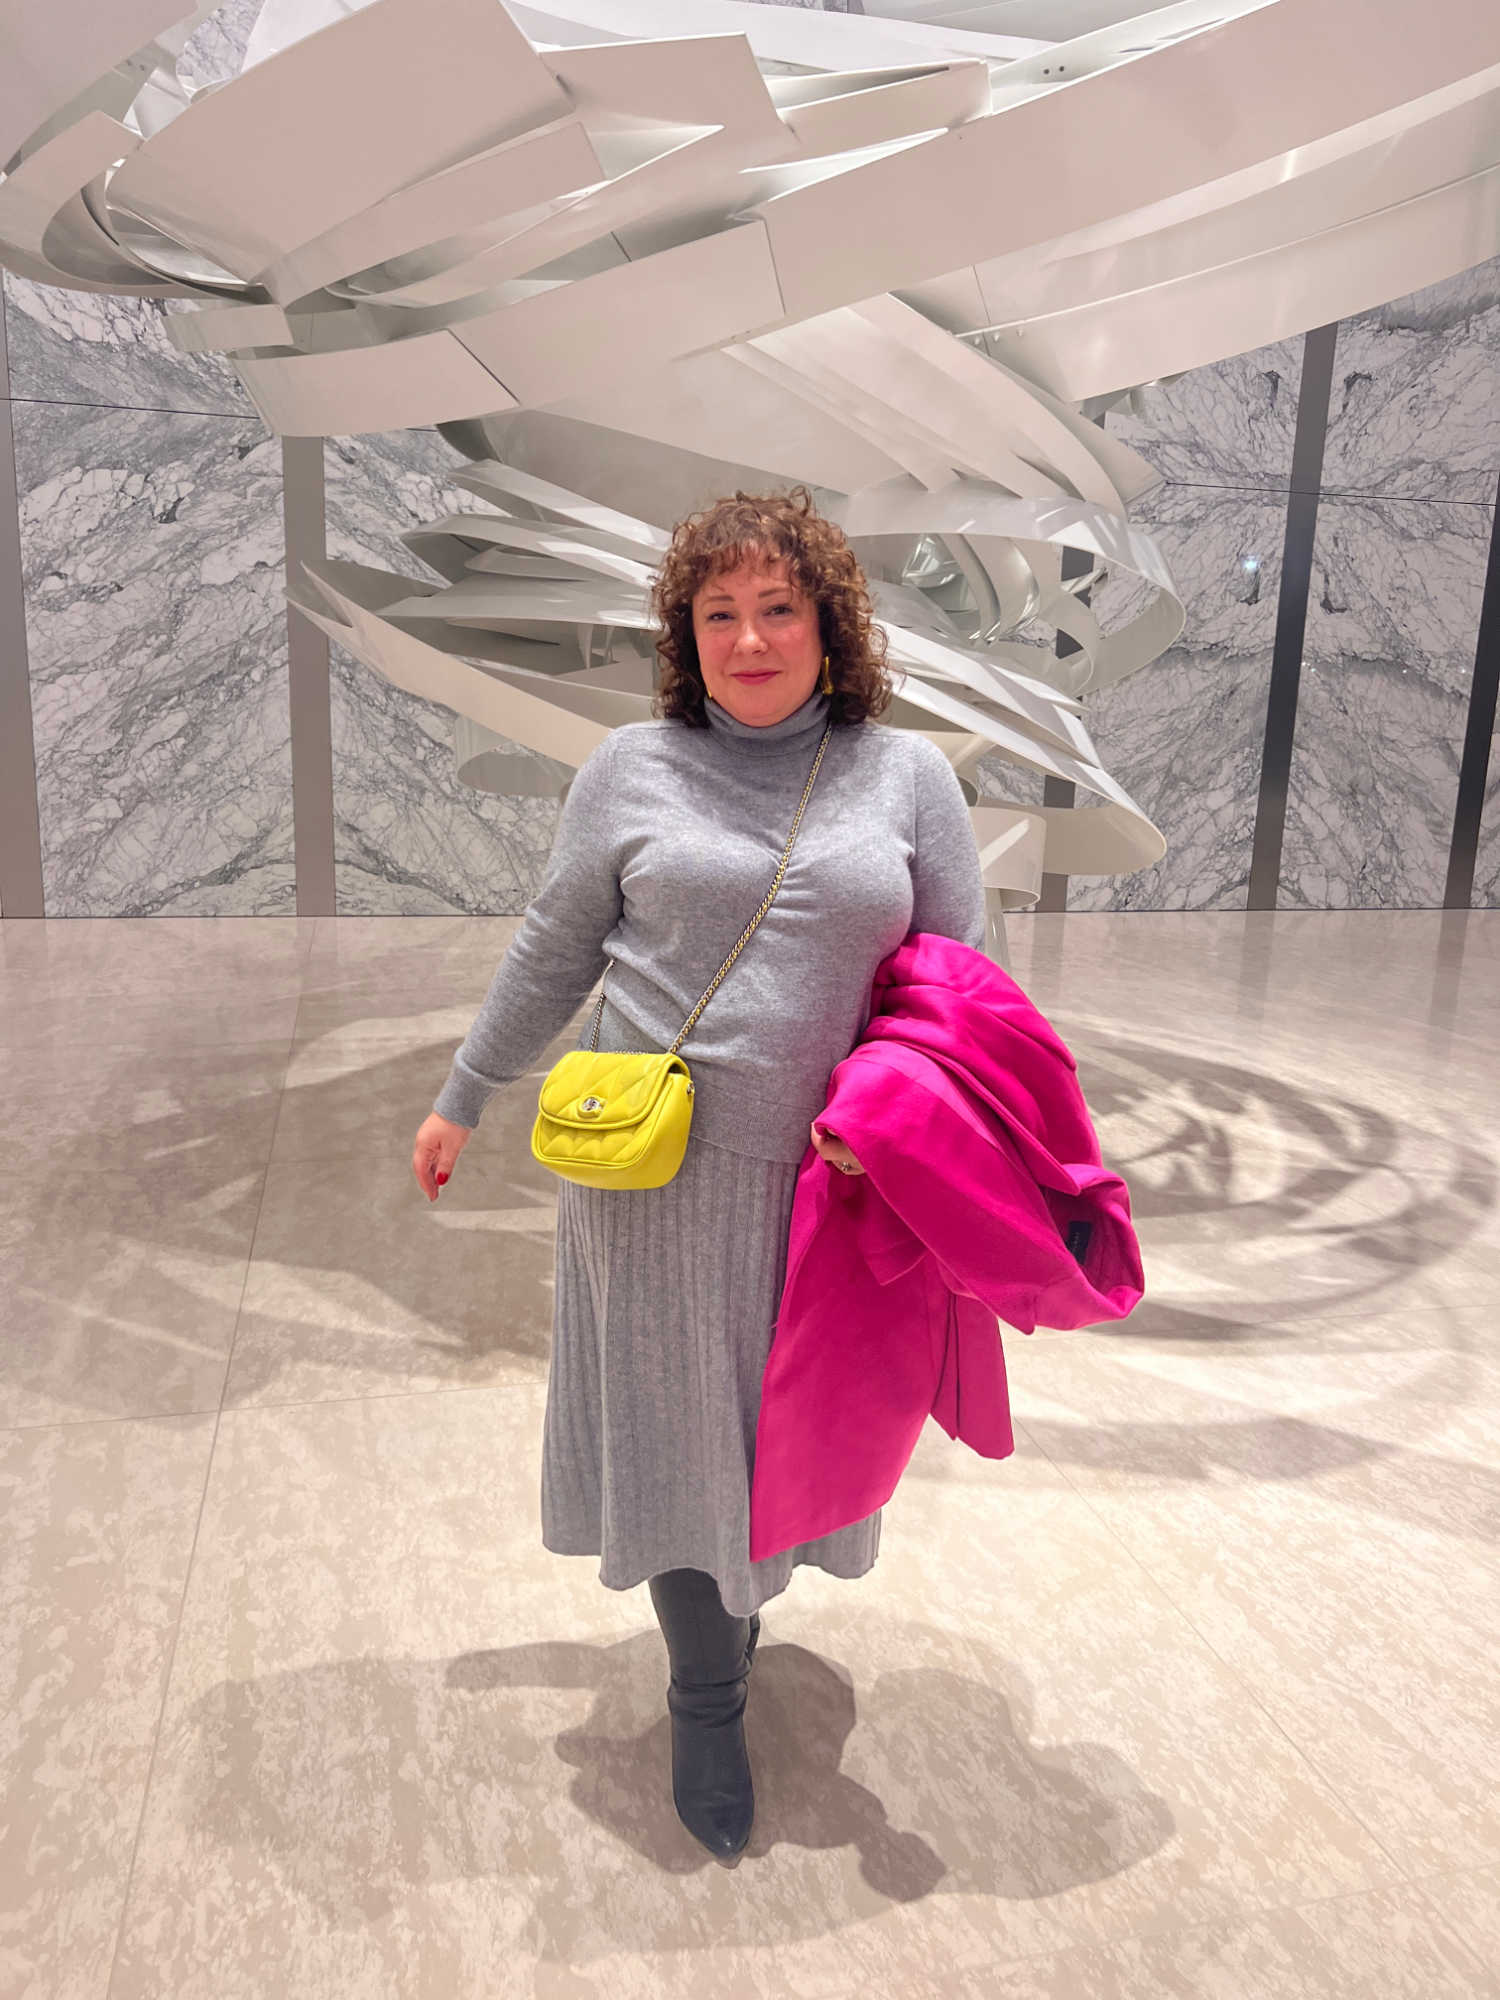 Alison of Wardrobe Oxygen in the lobby of an office building standing in front of a white modern art sculpture. She is wearing a gray cashmere turtleneck and matching skirt. She has a yellowish green crossbody bag and a hot pink wool coat in her hand. She is walking towards the camera.